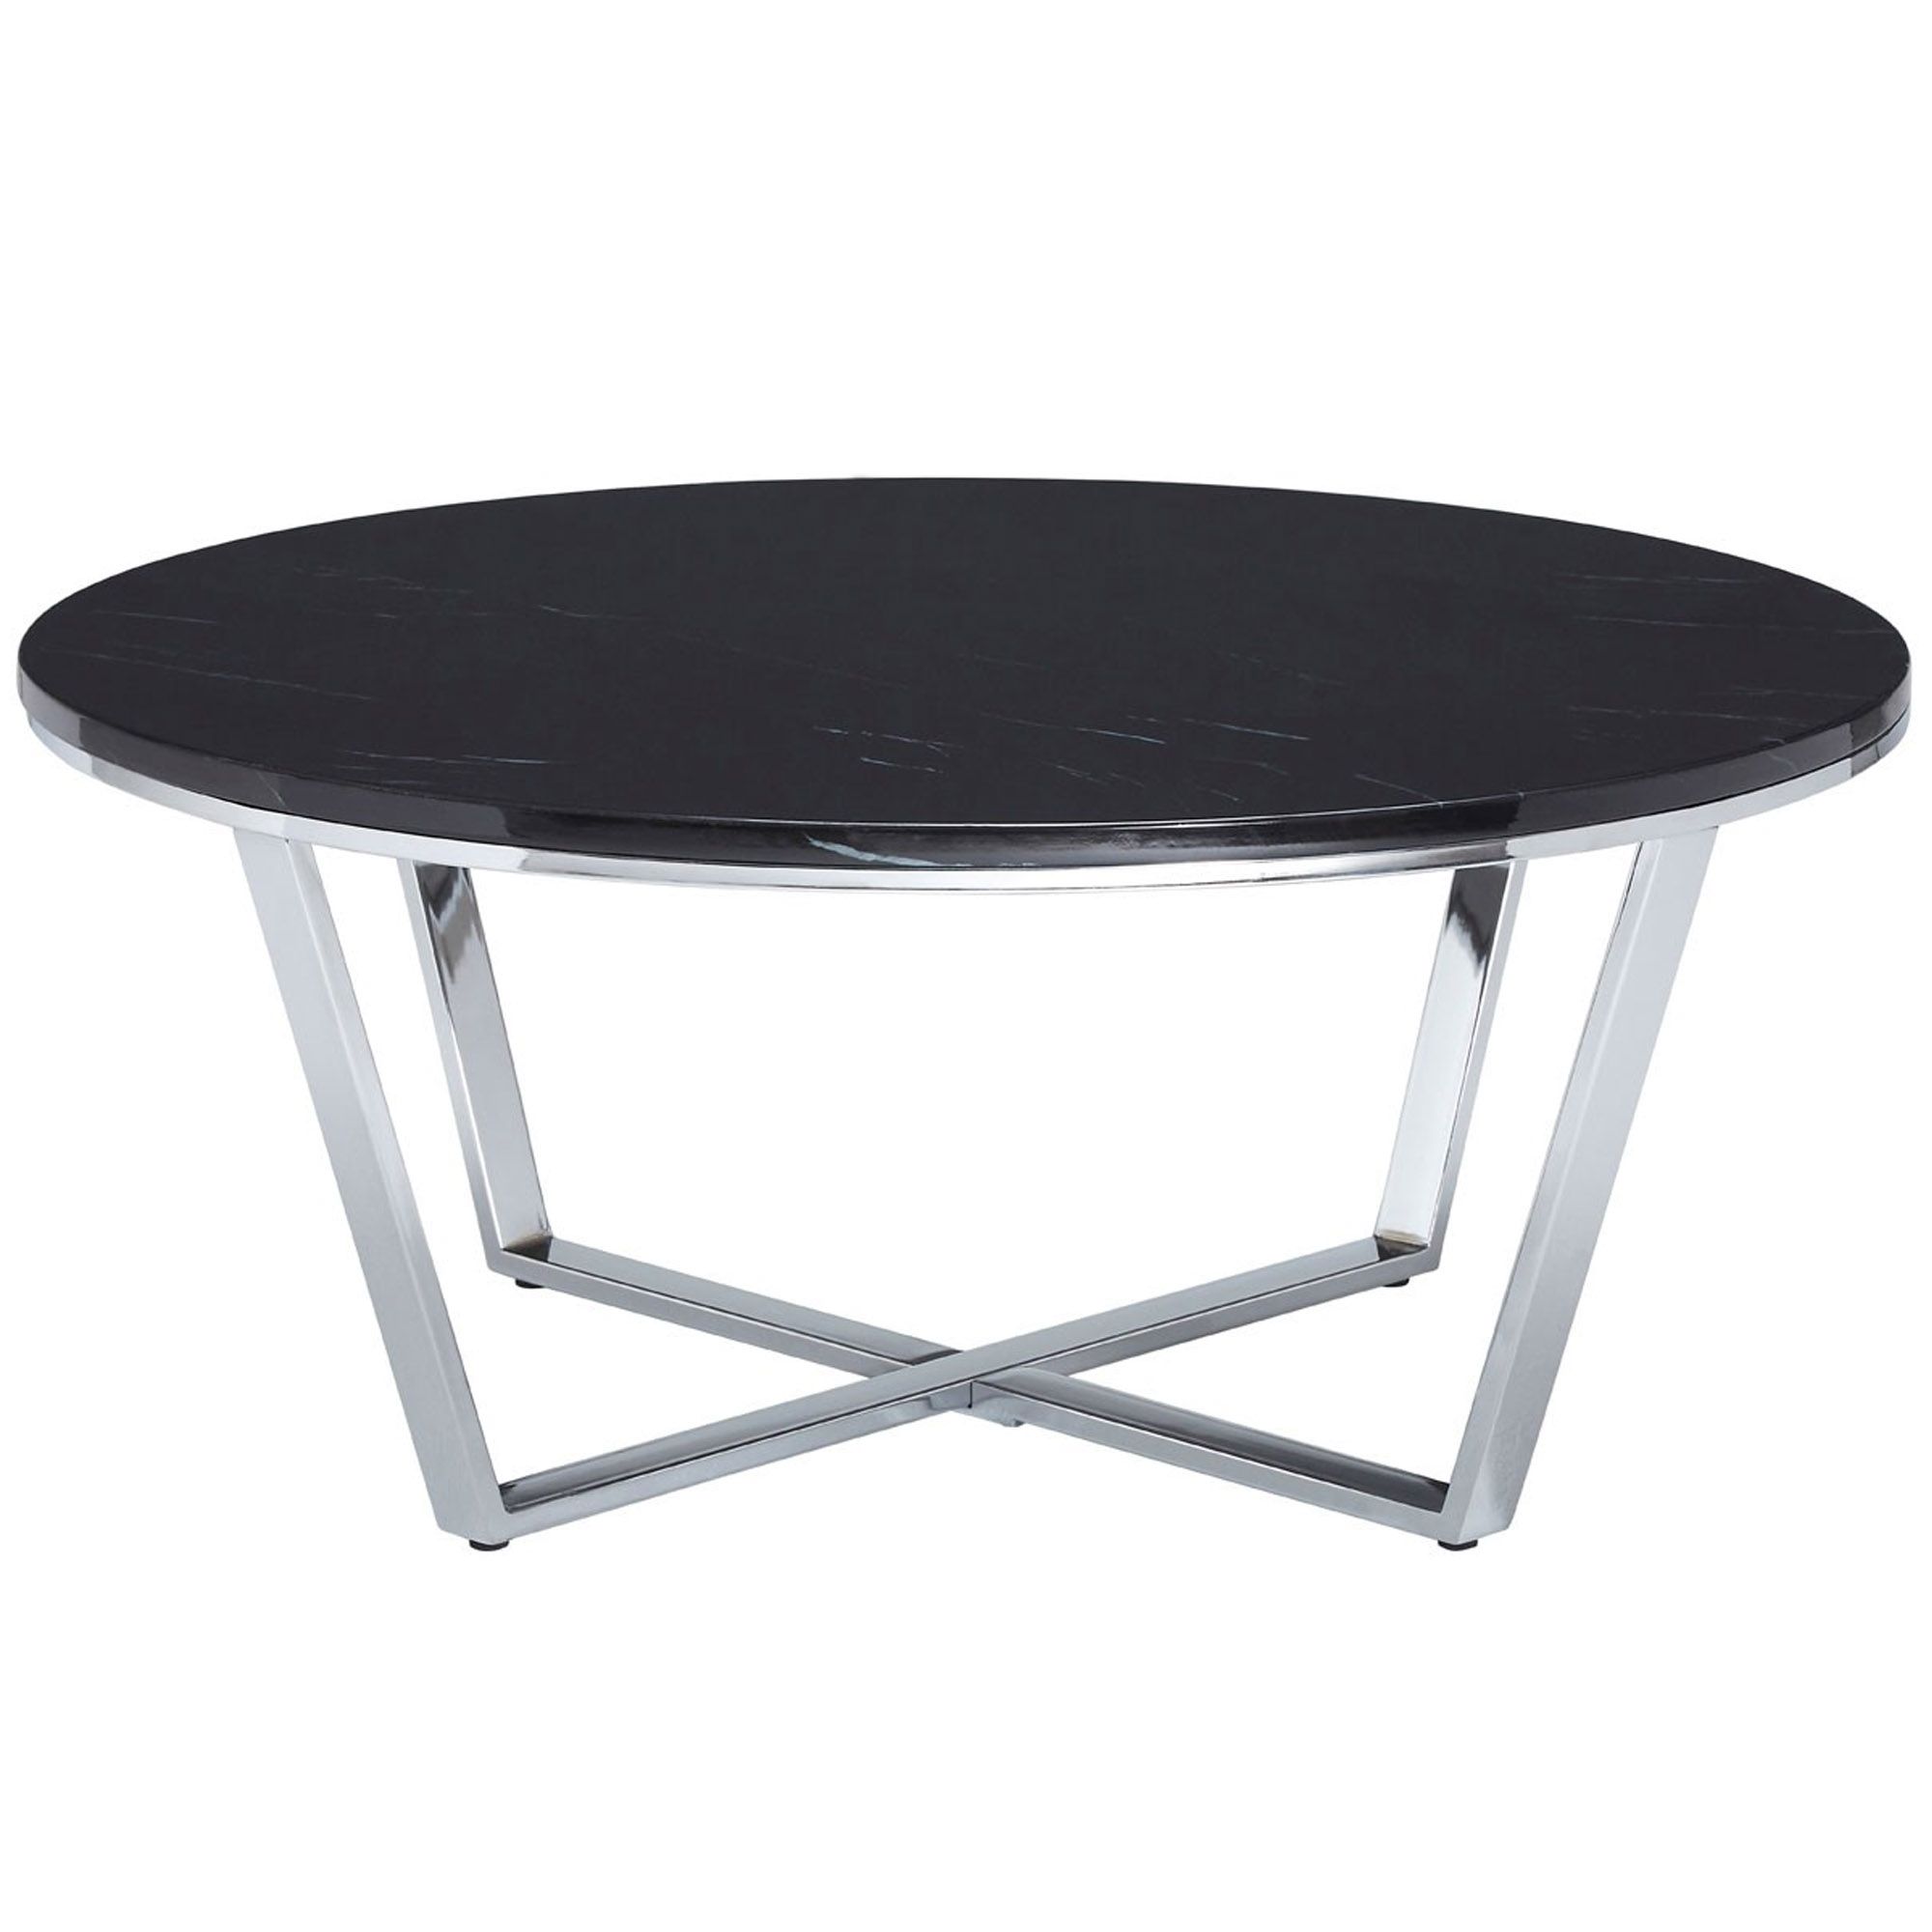 Black Allure Round Coffee Table | Modern & Contemporary Furniture Throughout Full Black Round Coffee Tables (View 14 of 15)